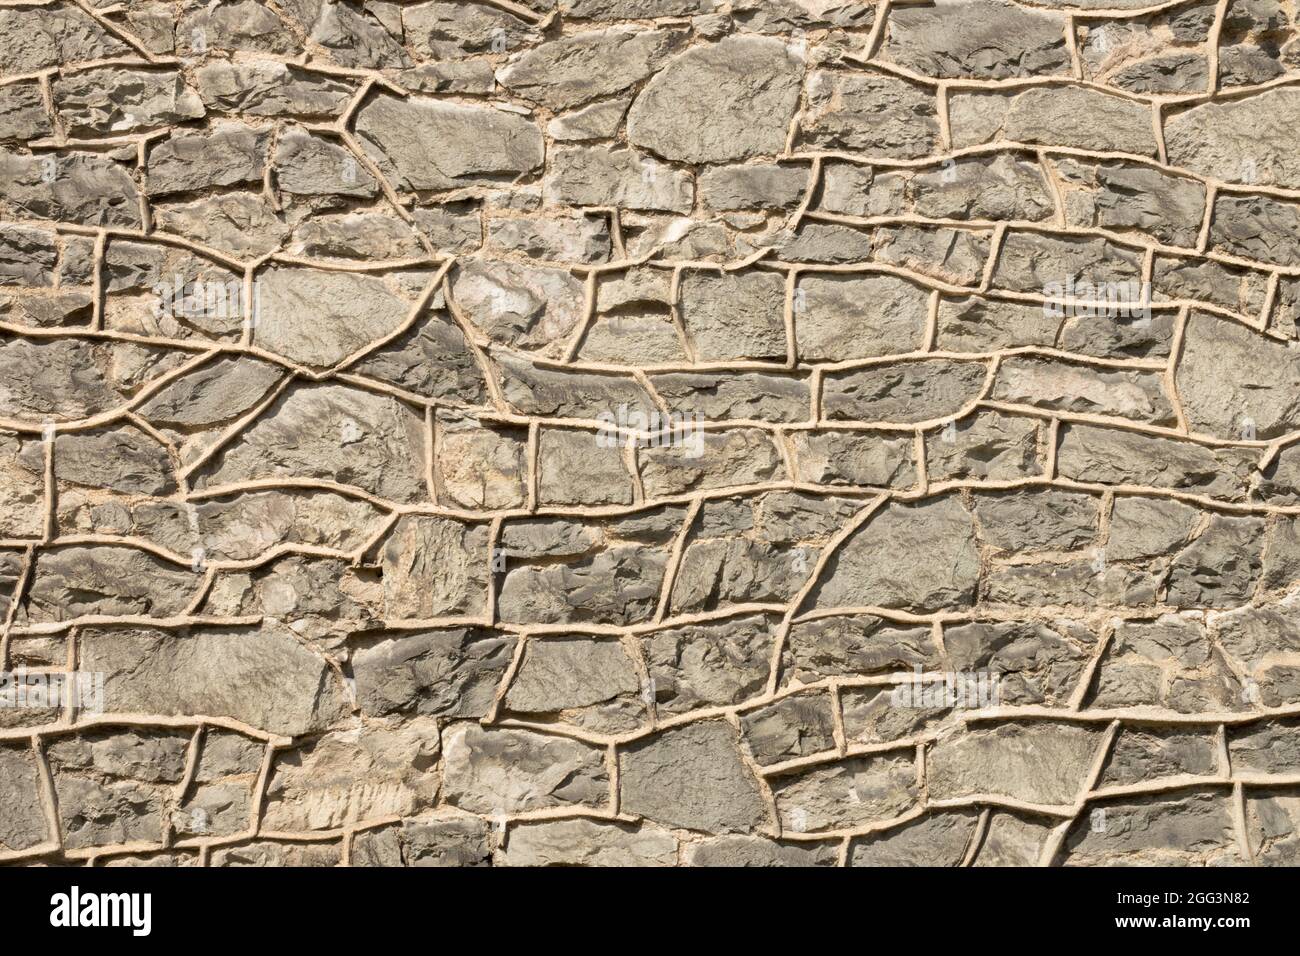 Joints stone wall, background pattern texture stones Stock Photo